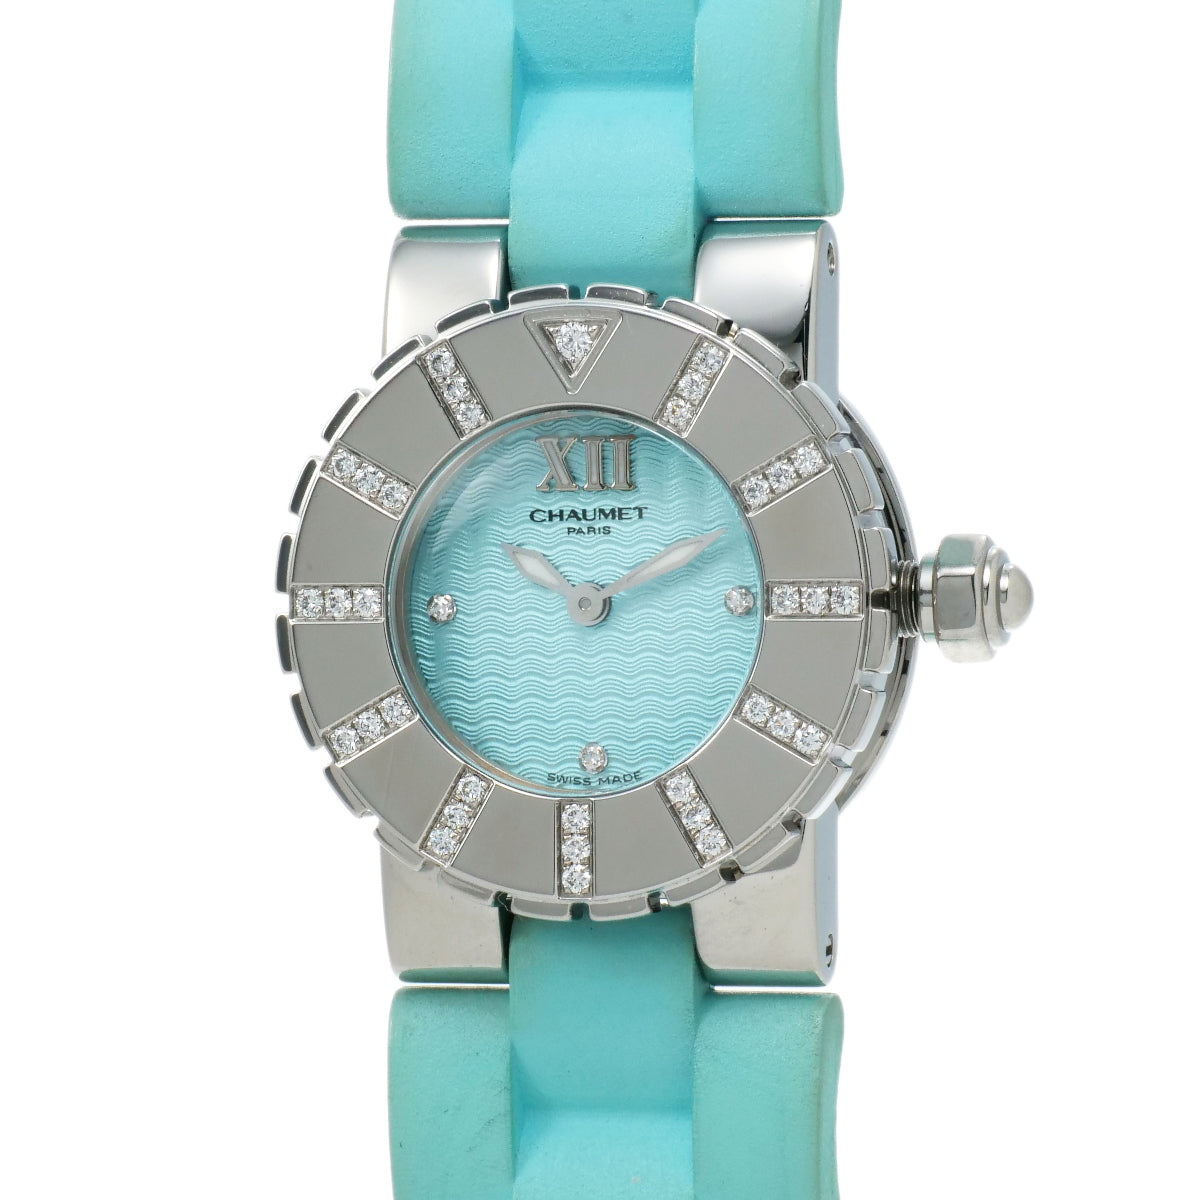 Chaumet Class 1 Women's Watch with Light Blue Dial and Diamond Bezel in Stainless Steel/Rubber 621-2130 in Good condition